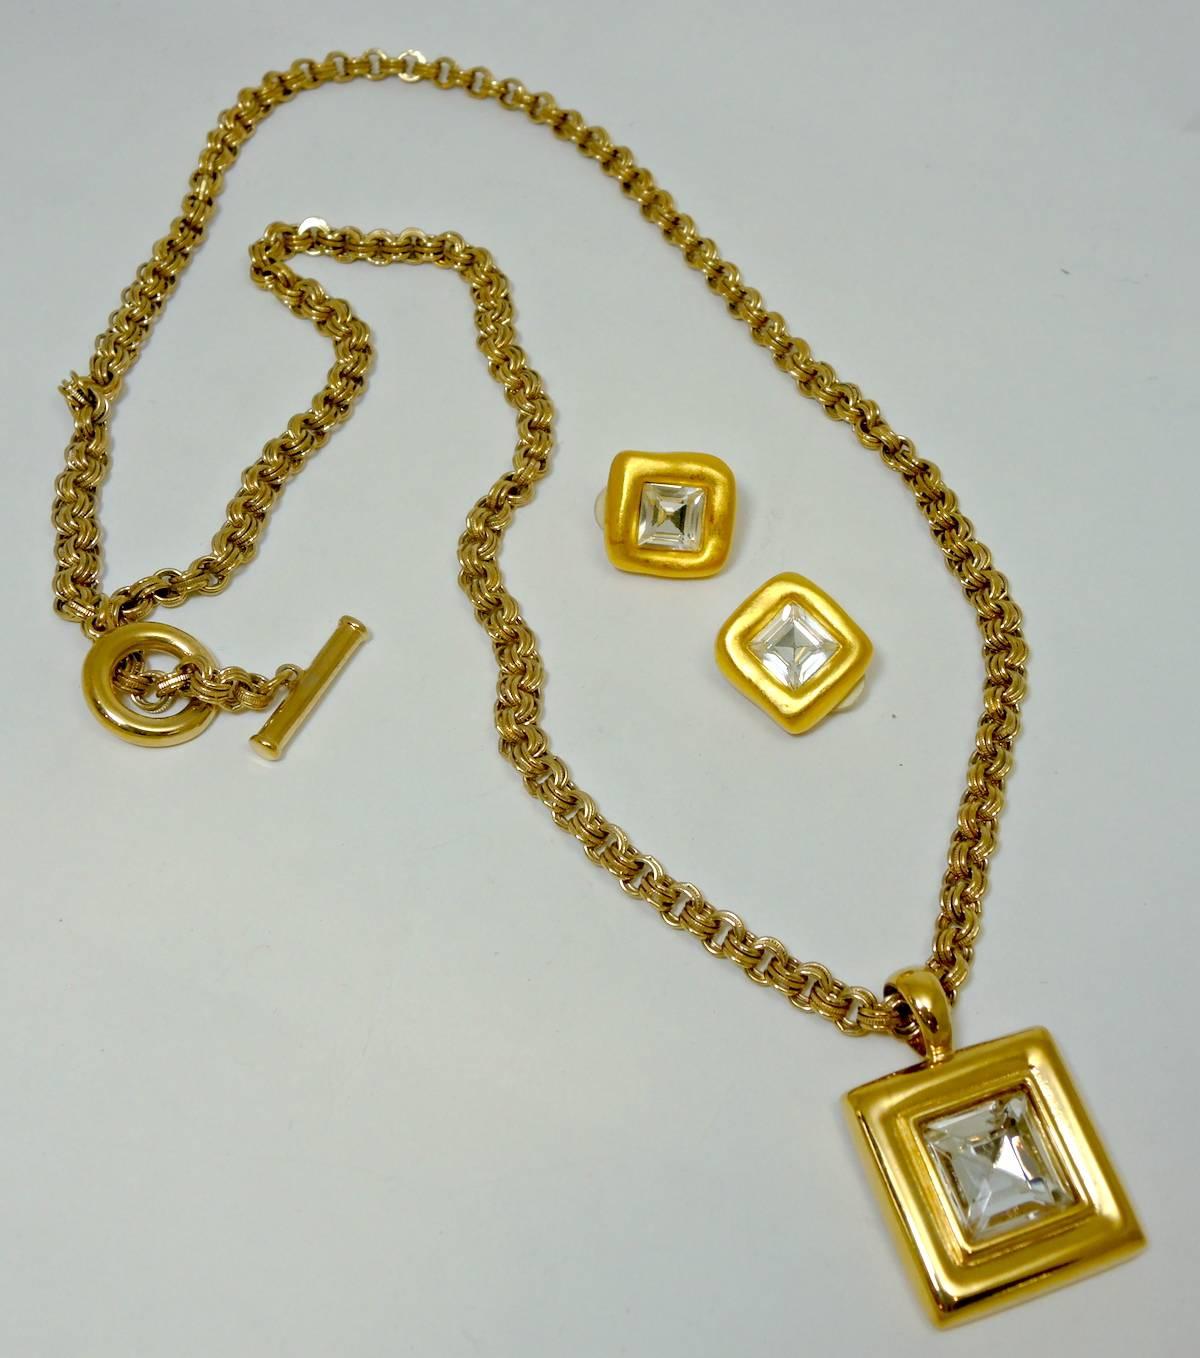 This Givenchy necklace is designed with a pendant that has a large gold tone frame with a square faceted crystal inside. It has a long and heavy rope link chain with a toggle closure. It measures 33” x 1/4”. The pendant measures 1-1/8” x 1-1/8”. 